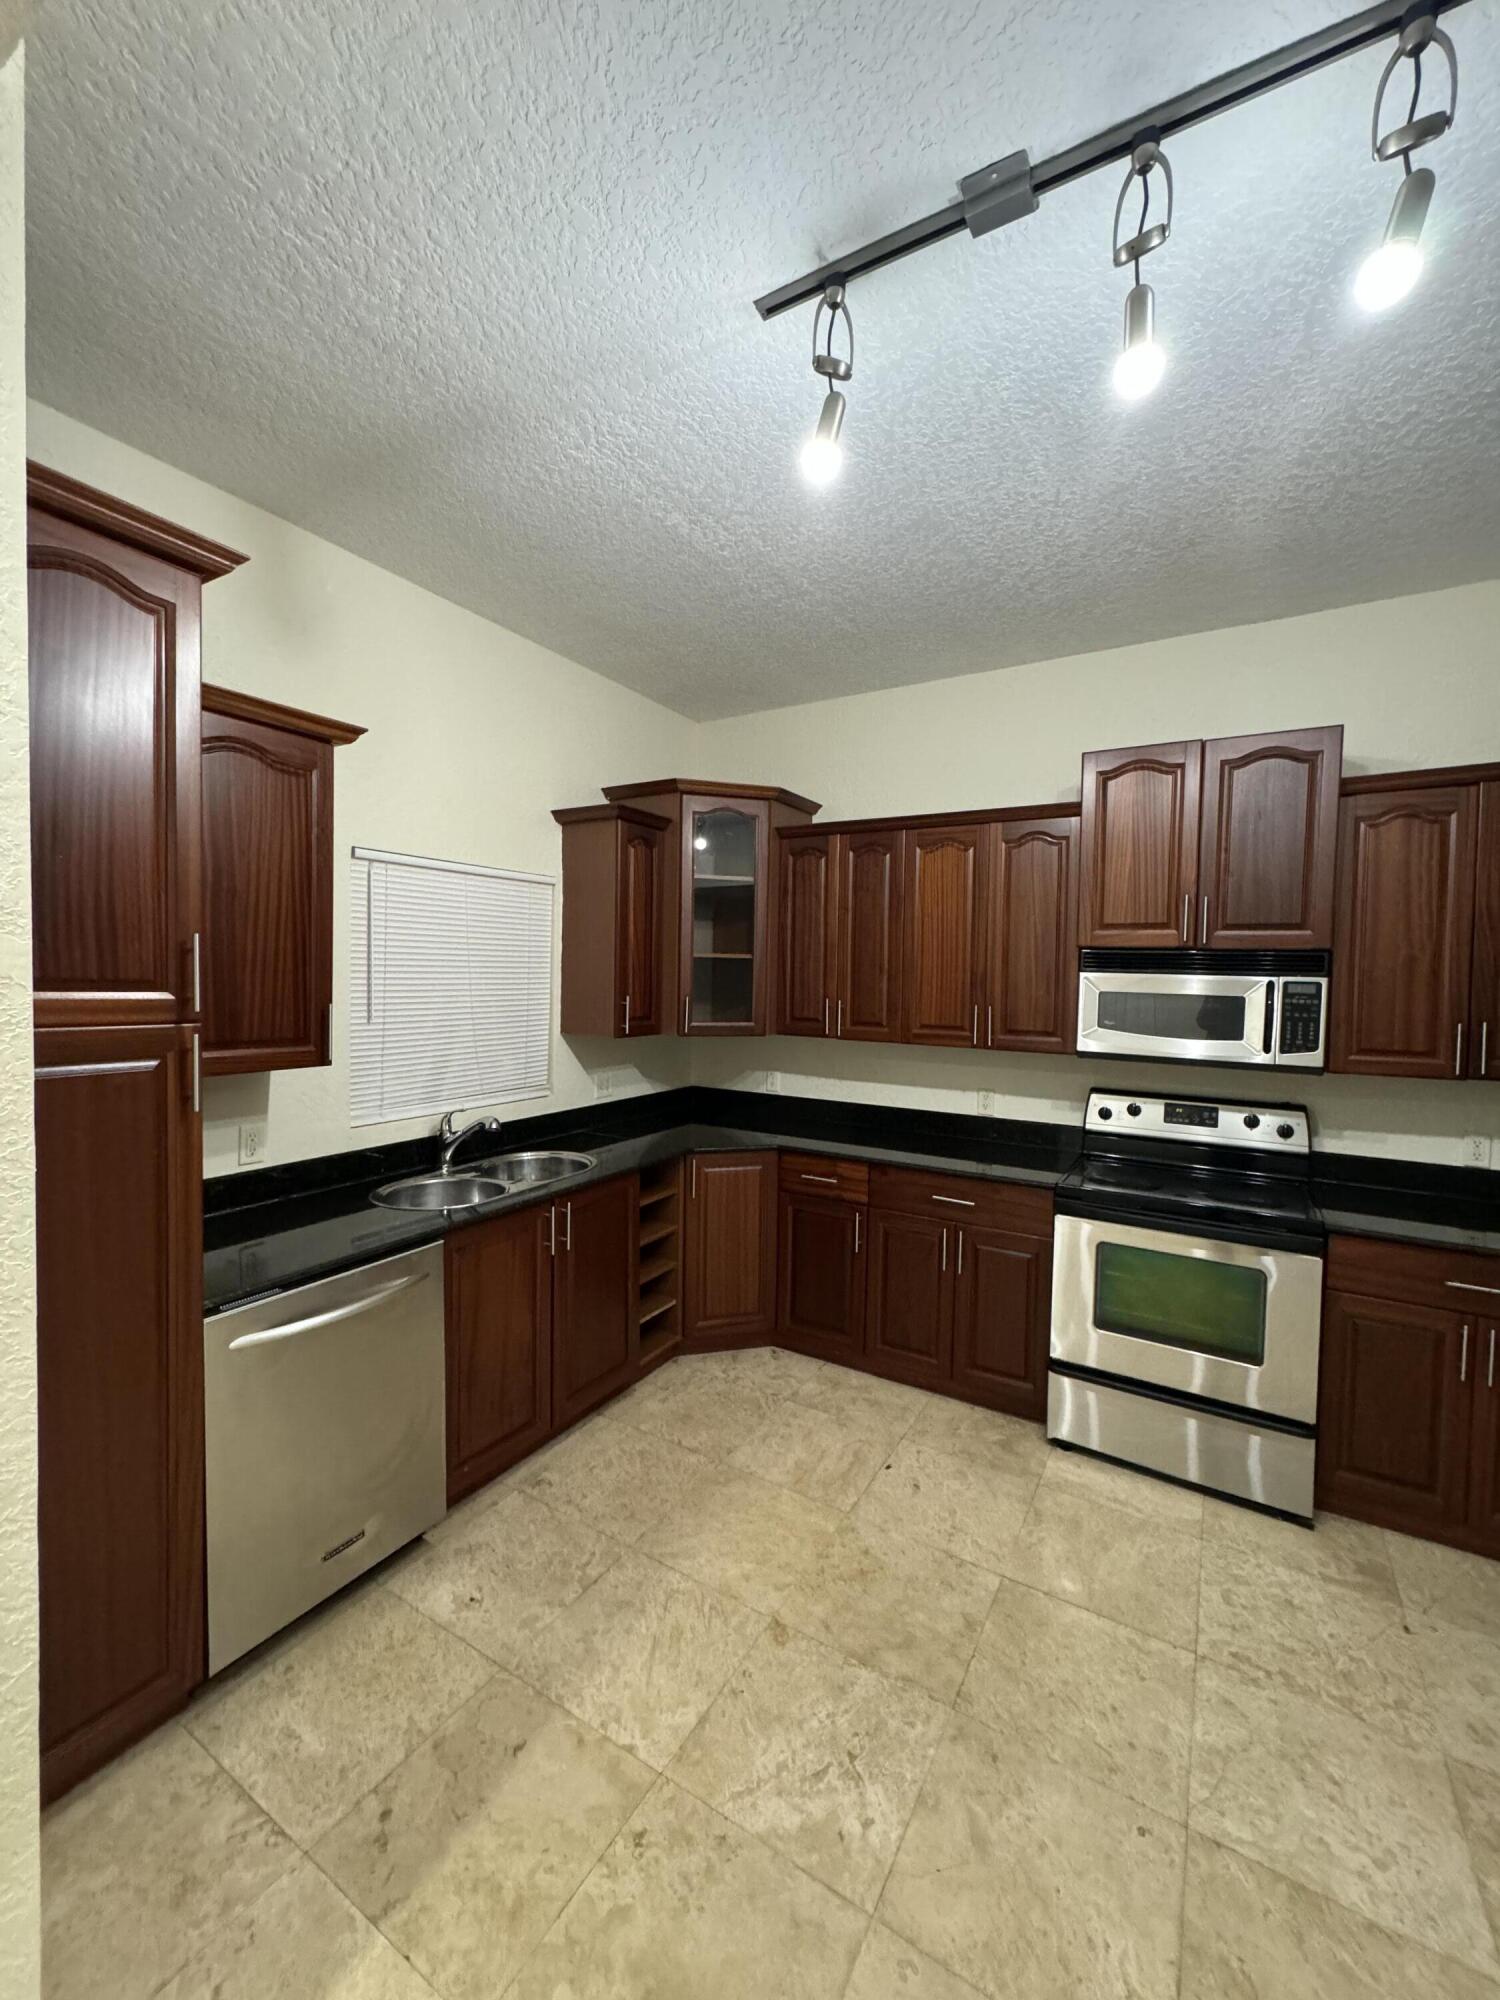 a kitchen with stainless steel appliances granite countertop a refrigerator and stove